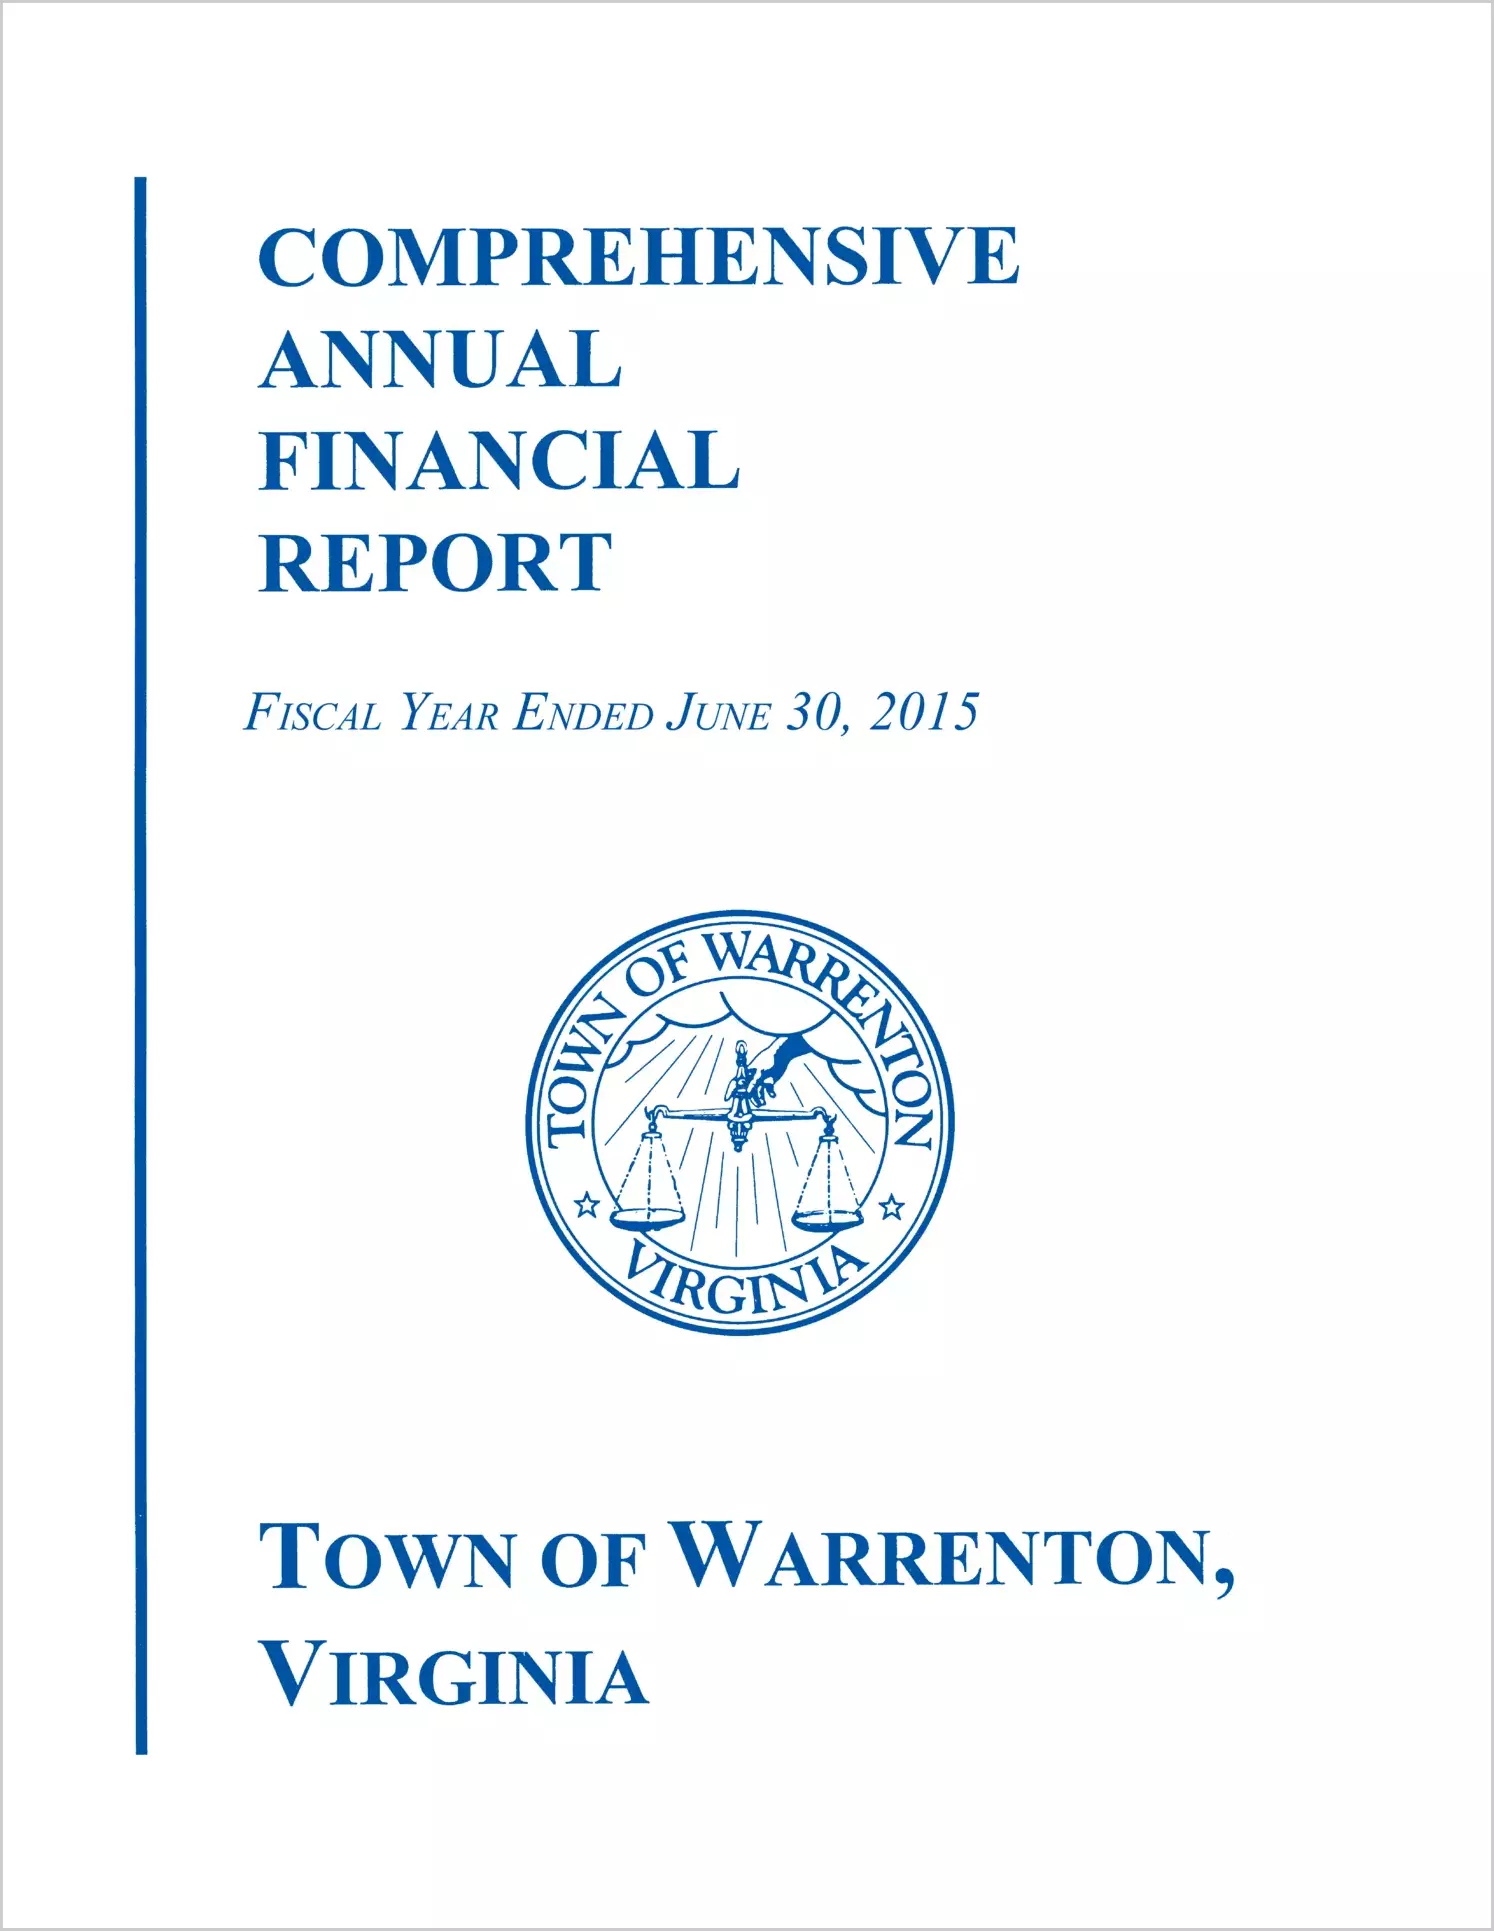 2015 Annual Financial Report for Town of Warrenton